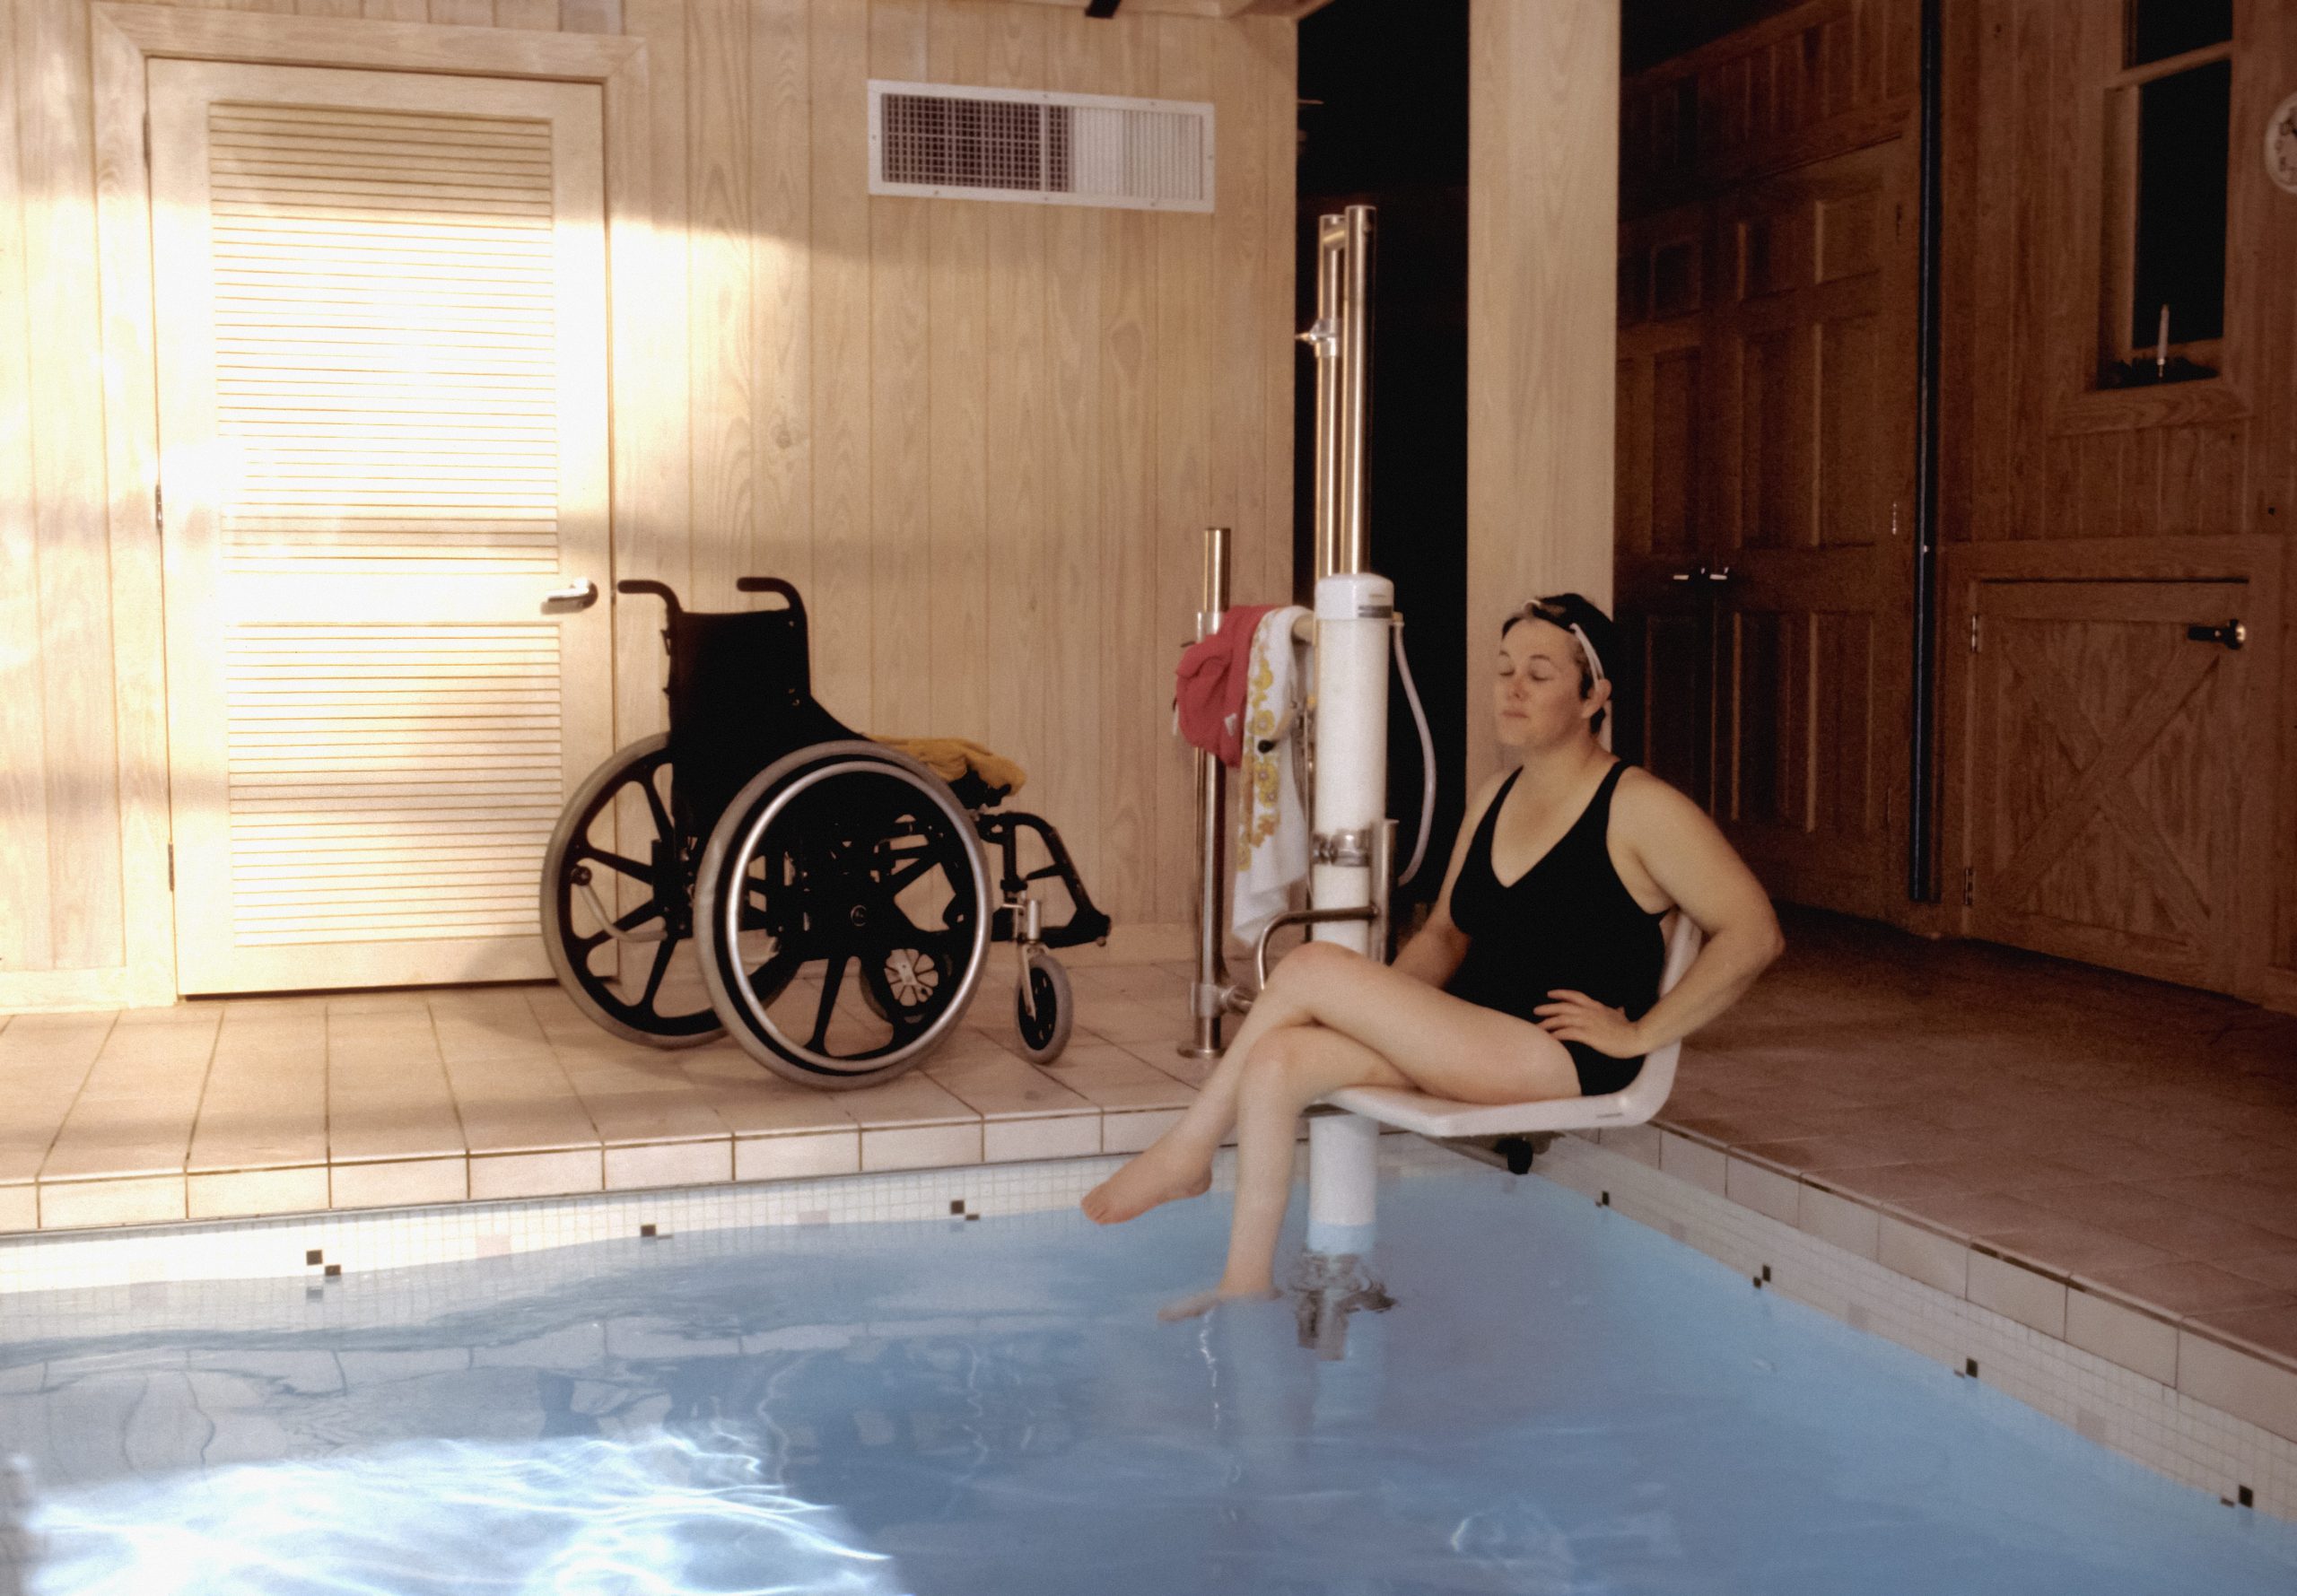 Photograph of a woman using a wheelchair-to-water pool lift to enter a pool. Her wheelchair is in the background.